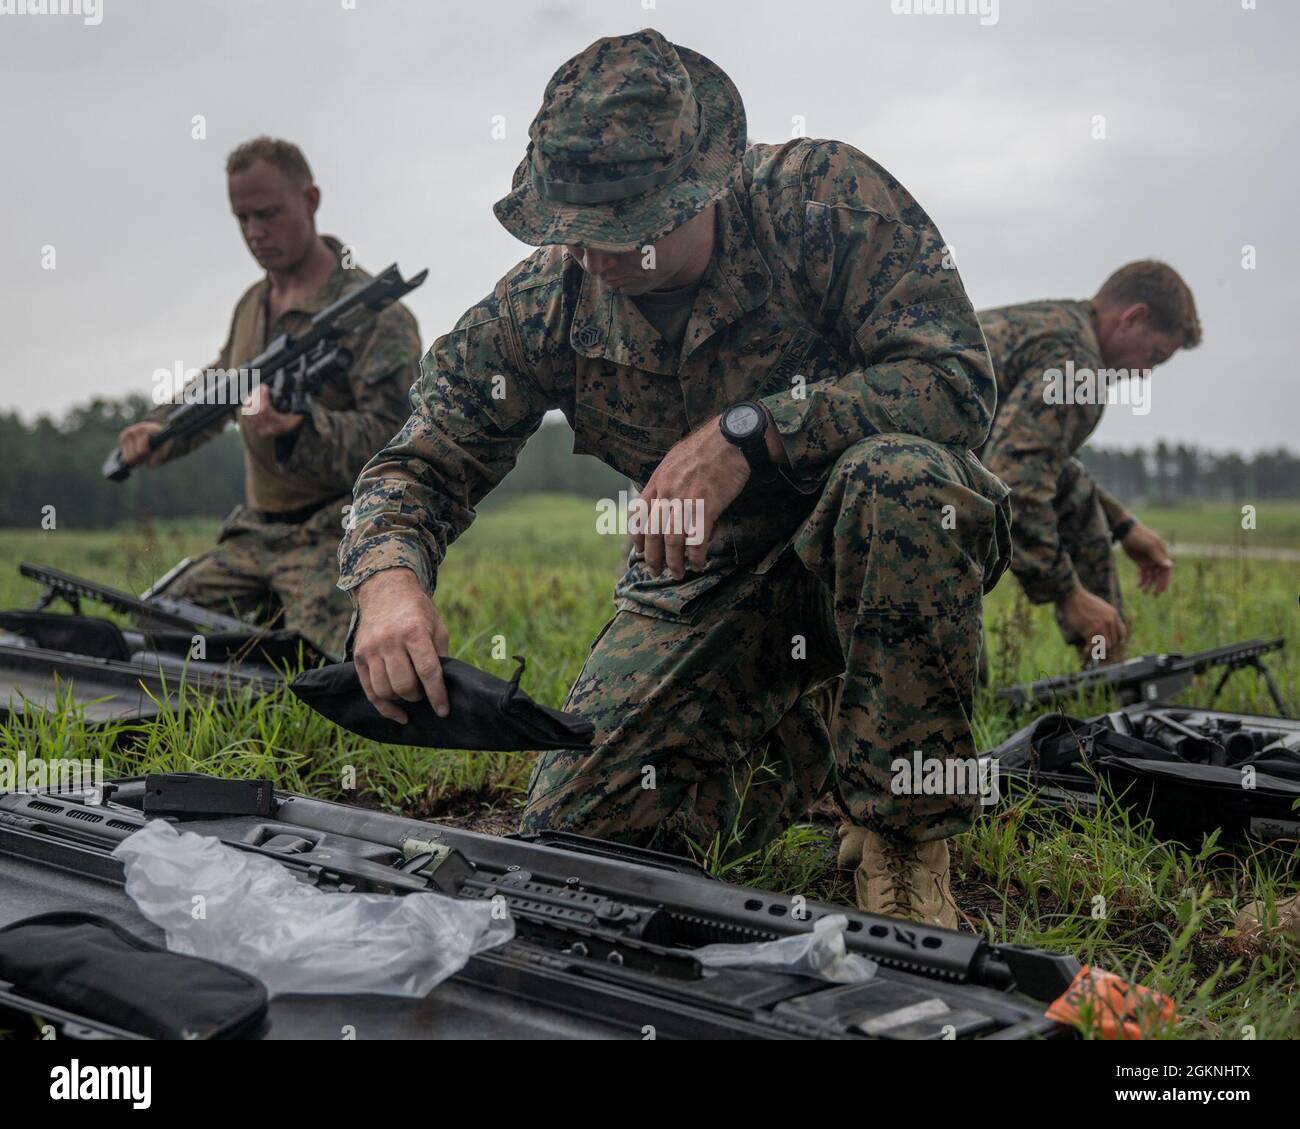 Marines with 3rd Force Reconnaissance Company, 4th Marine Division, assemble their rifles during sniper training at Camp Shelby, Mississippi, on June 6, 2021. The Marines trained with the M107 semi-automatic long-range sniper rifle, an anti-materiel rifle that fires .50 caliber ammunition out to a maximum effective range of 2000 meters. Stock Photo